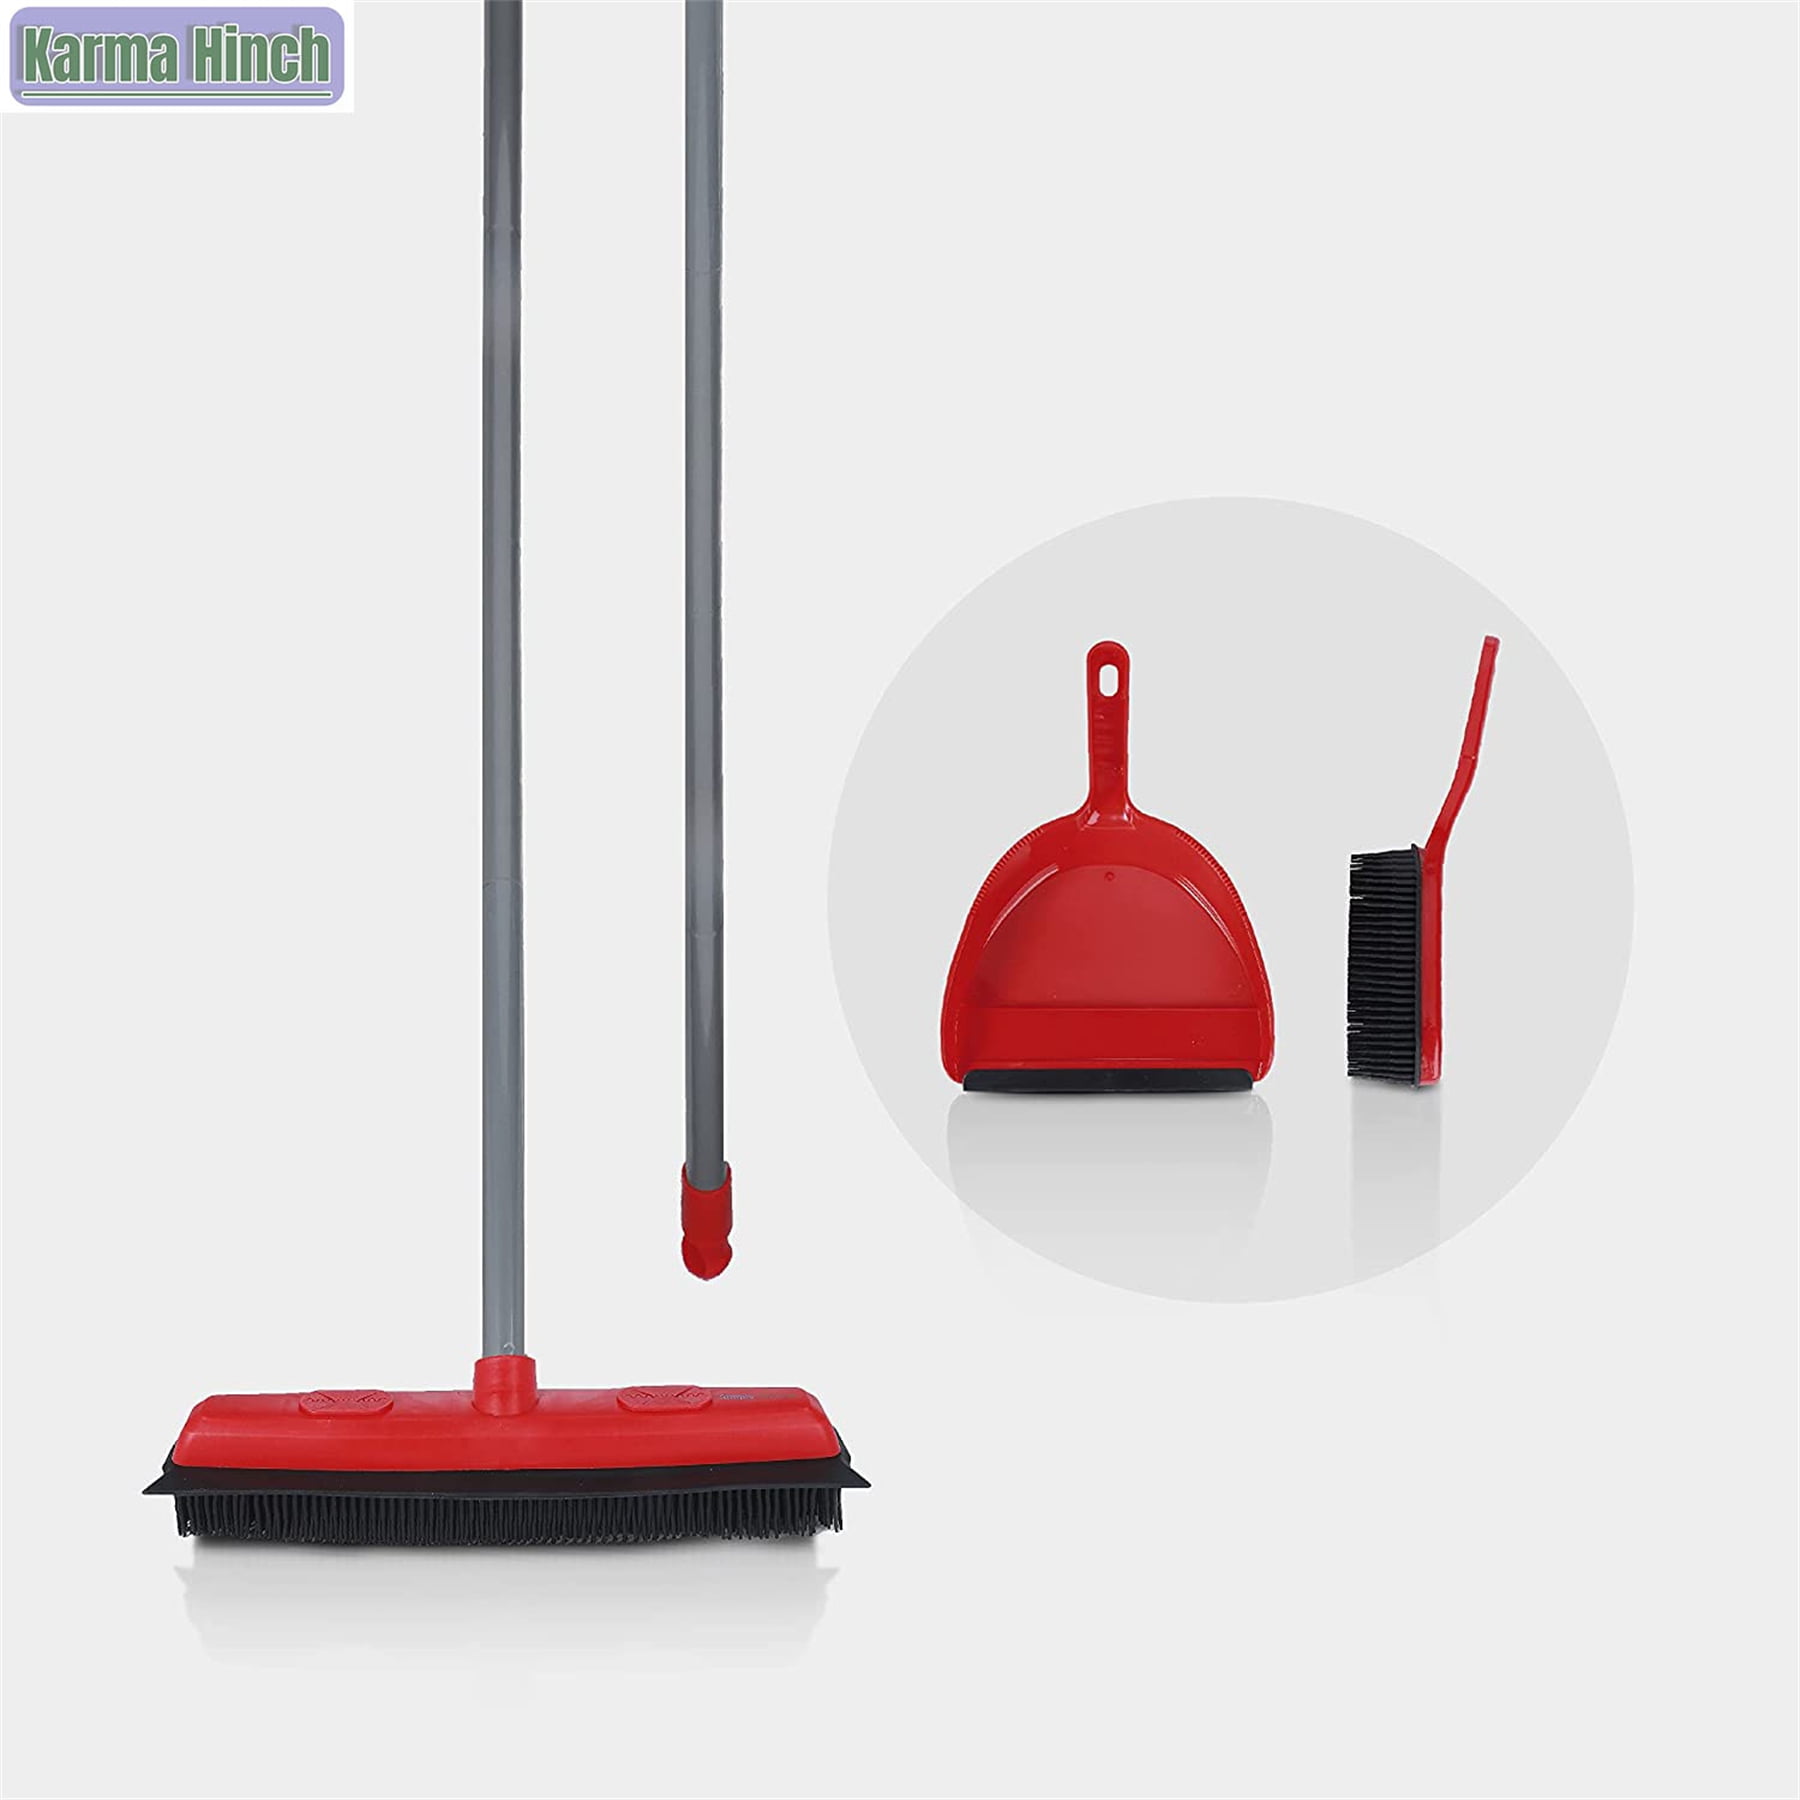 Floor Cleaning Broom Sets Hand Home Products Dust Squeeze Mop Sweeper  Dustpan Grabber Brush Wiper Garbage Kitchen Toilet House - AliExpress